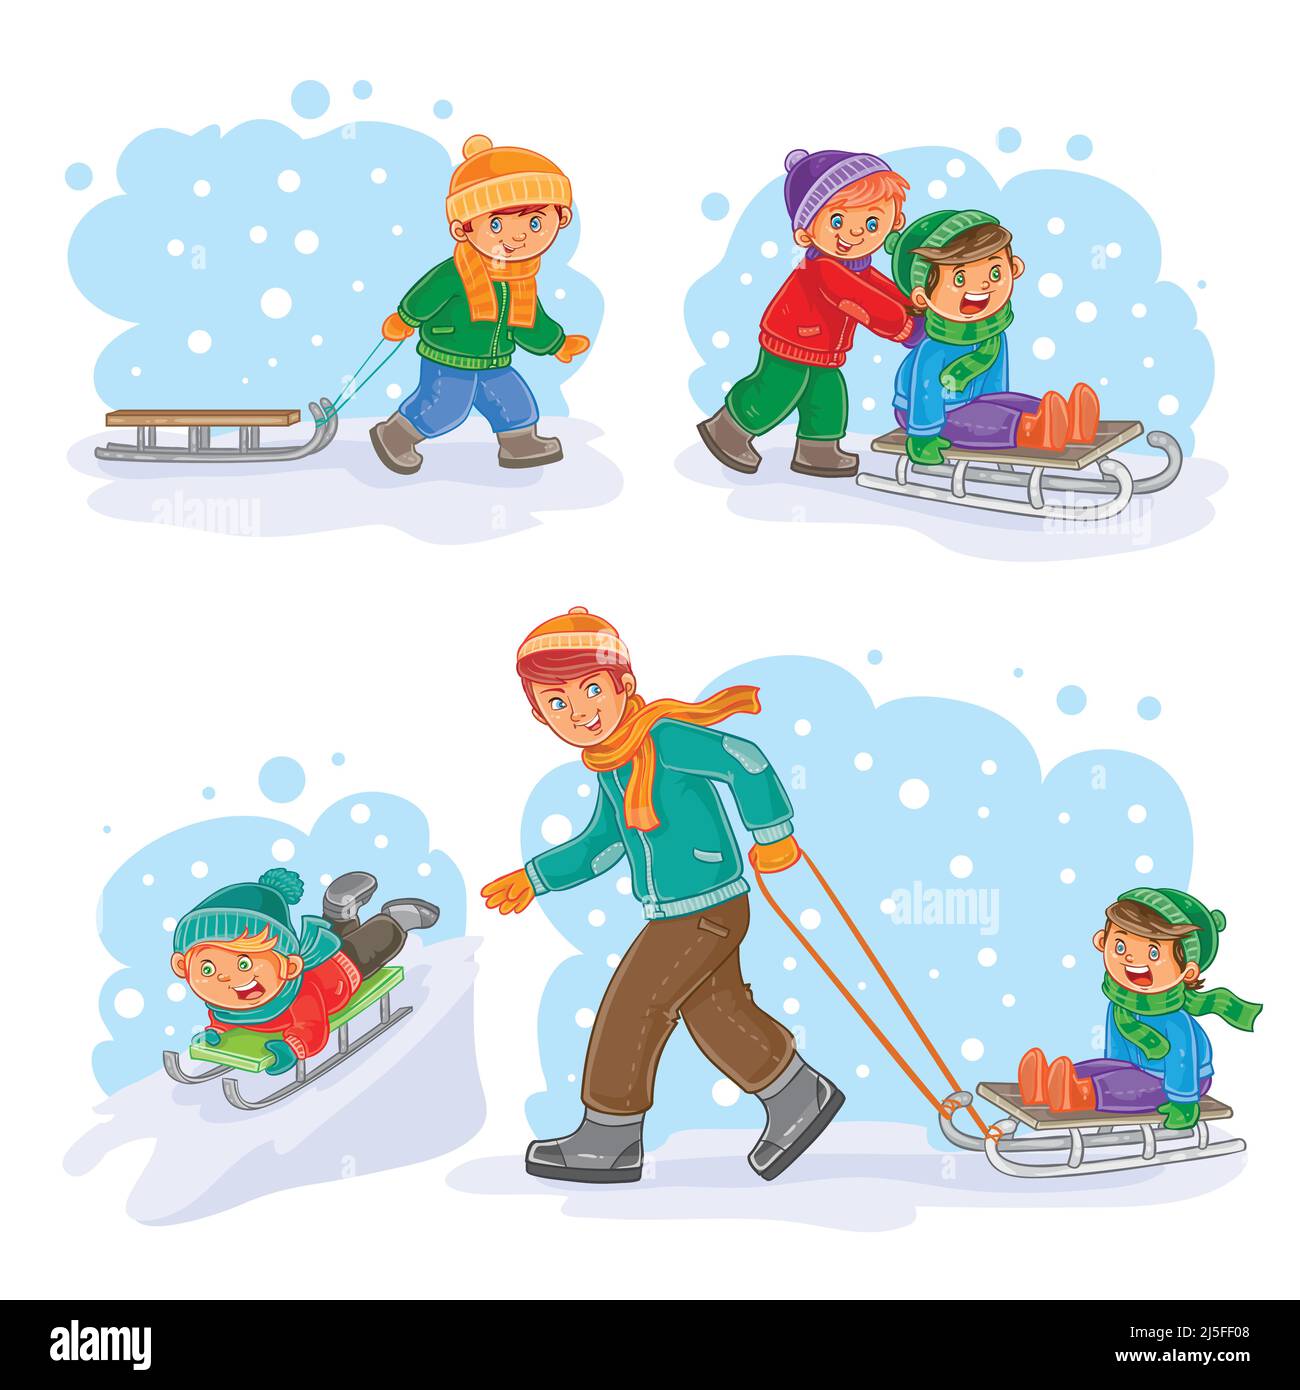 A set of vector icons of small children sledding Stock Vector